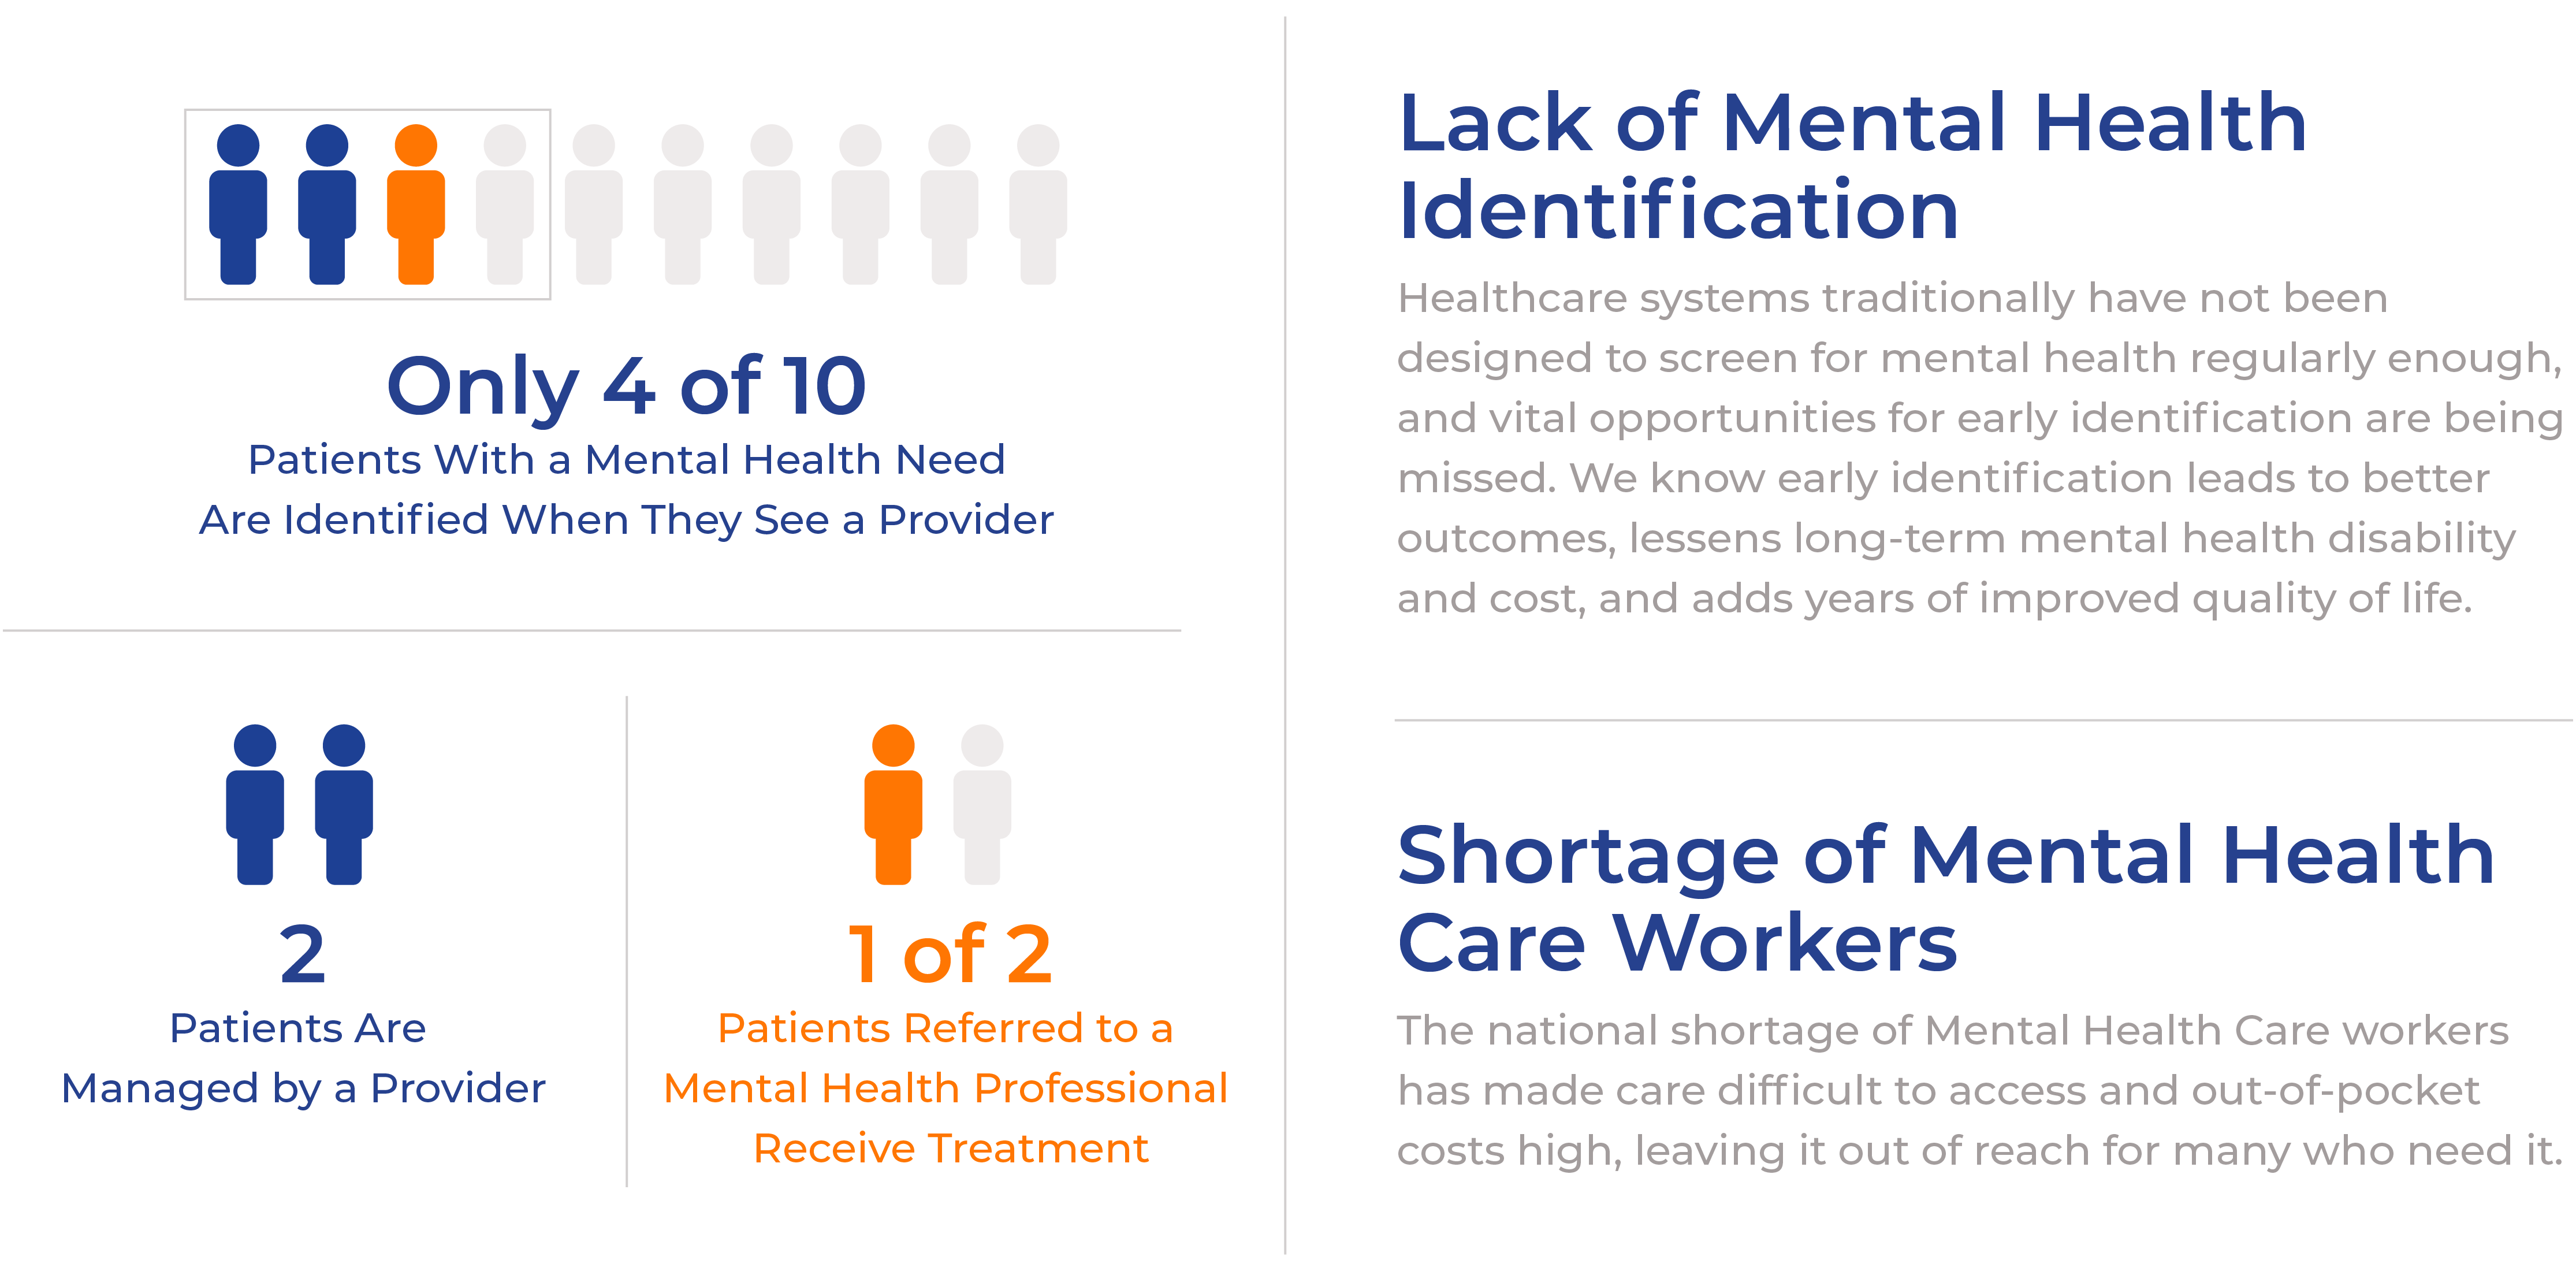 Only 4 of 10 Patients with a Mental Health Need Are Identified When They See a PCP, 2 Patients Are Managed by a PCP, and 1 of 2 Patients Referred to a Mental Health Professional Receive Treatment